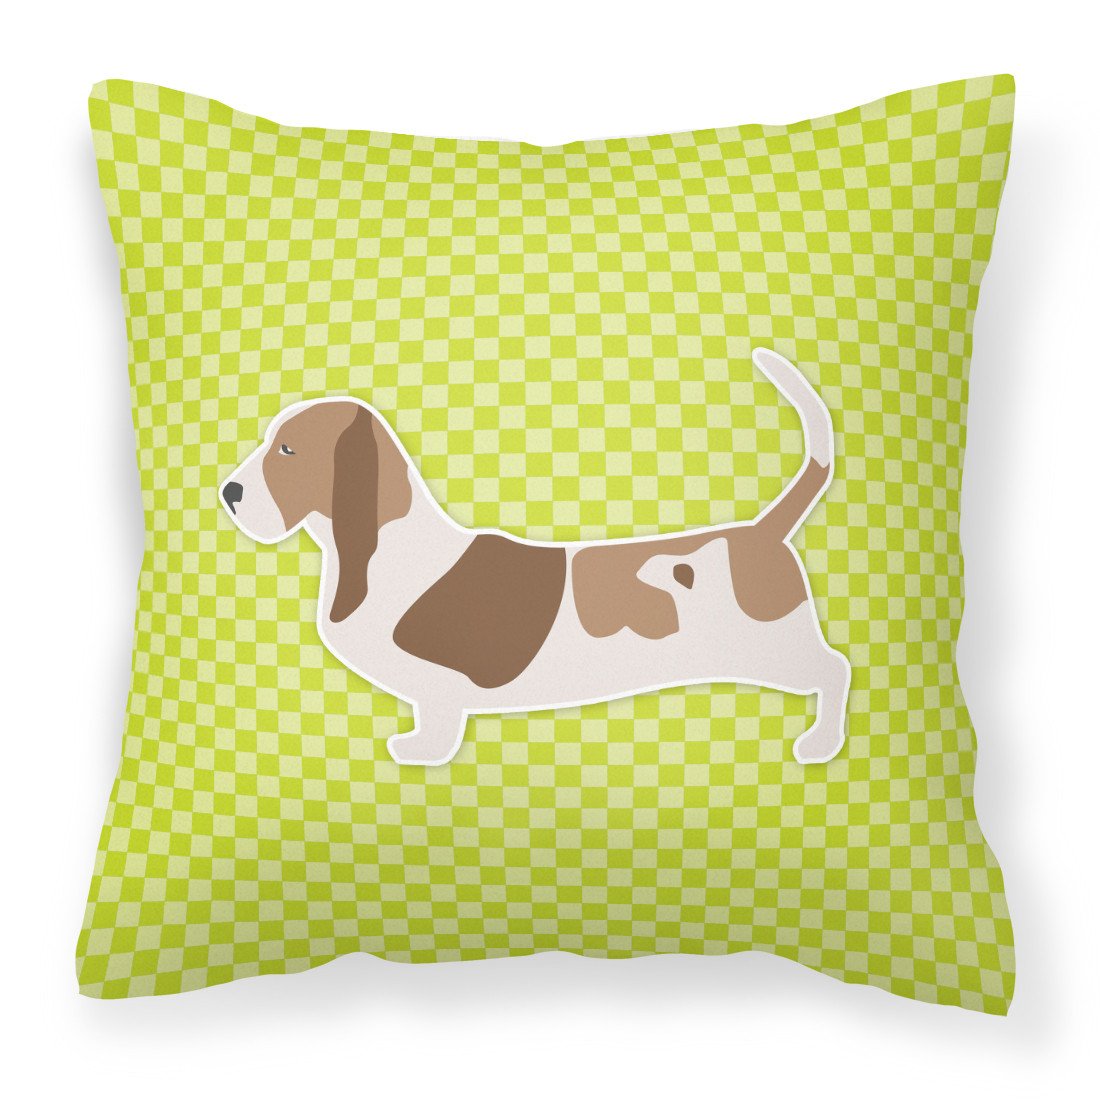 Basset Hound Checkerboard Green Fabric Decorative Pillow BB3802PW1818 by Caroline's Treasures